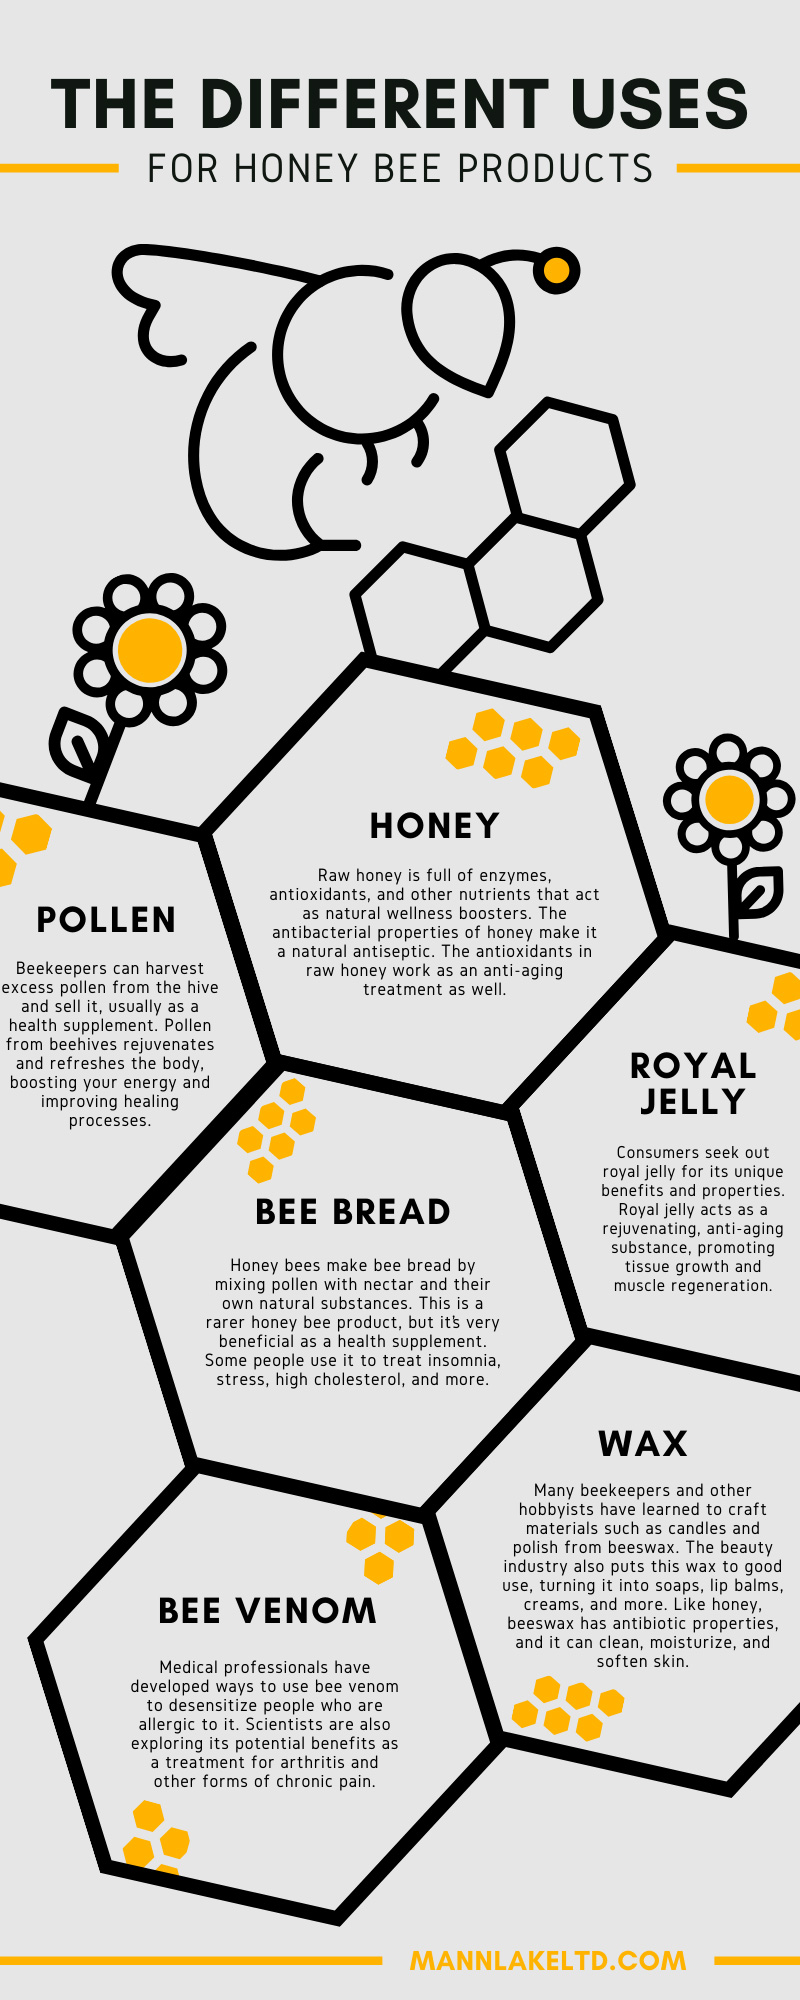 II. Health Benefits of Honey and Hive Products